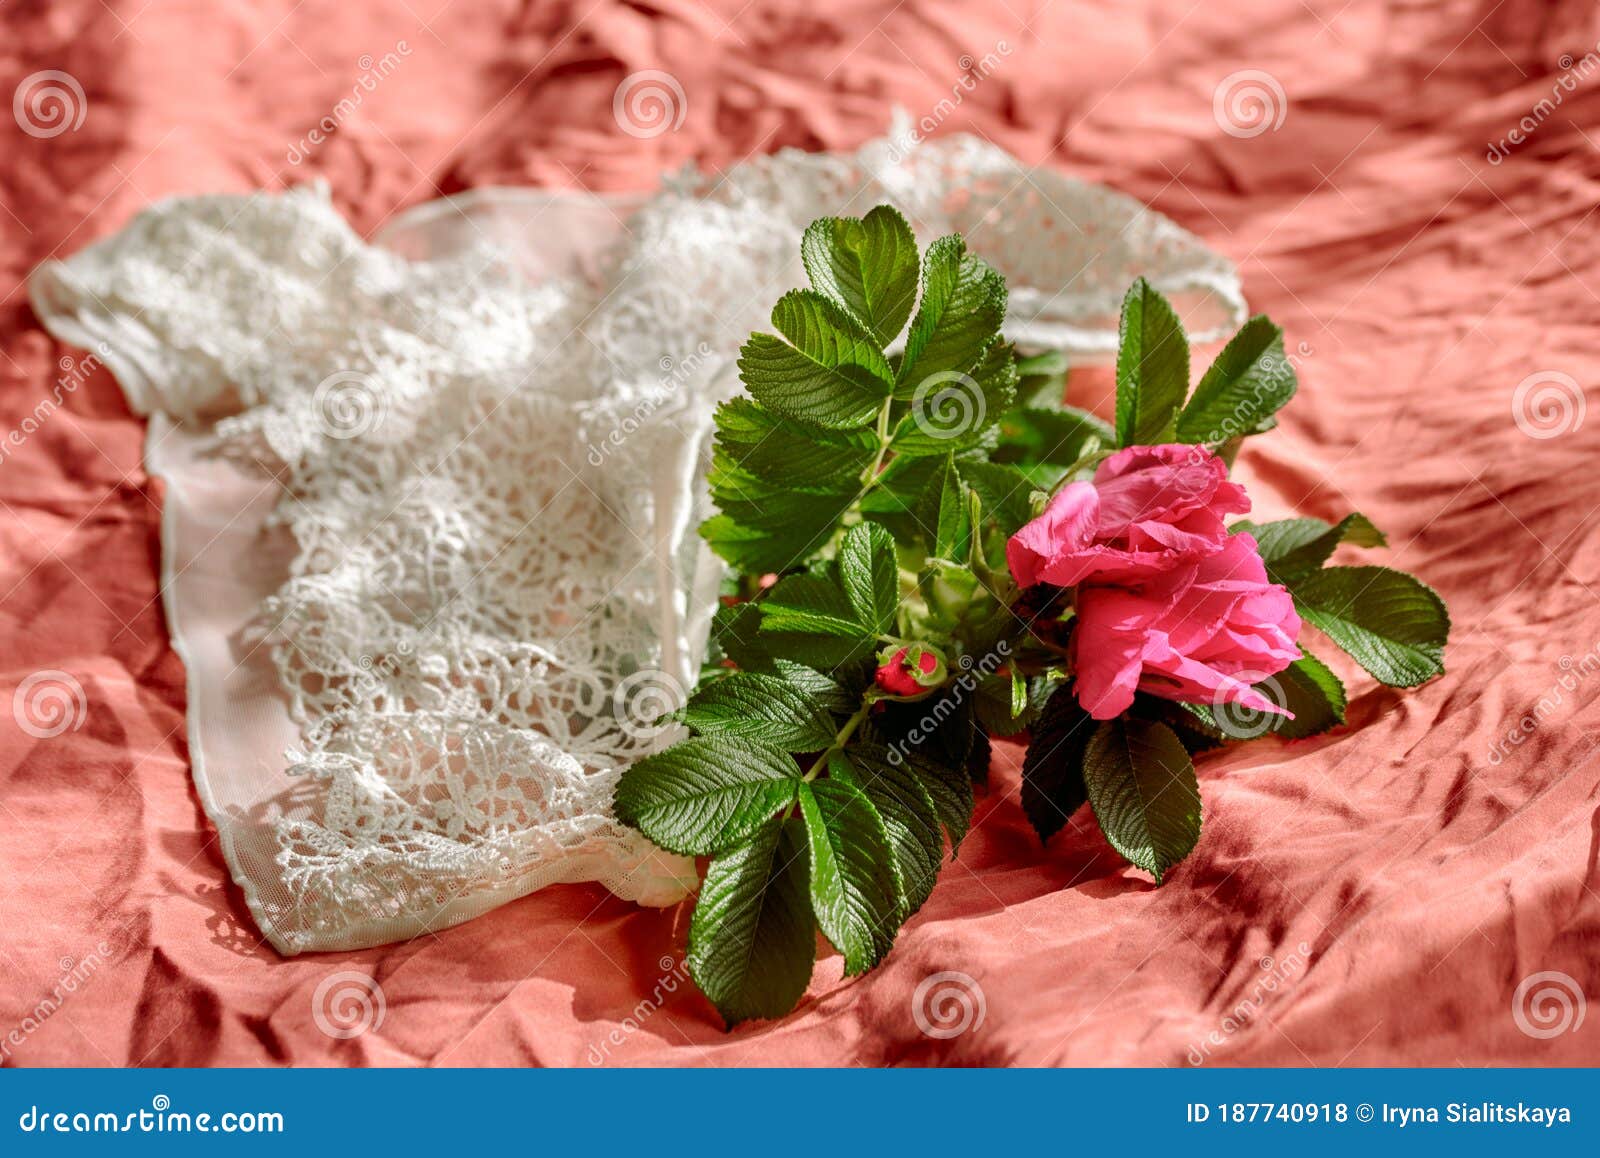 Woman`s Bra on Unmade Bed.Openwork White Cotton Underpants on Crumpled  Blanket. Red Rose Stock Photo - Image of infections, fabric: 187740918